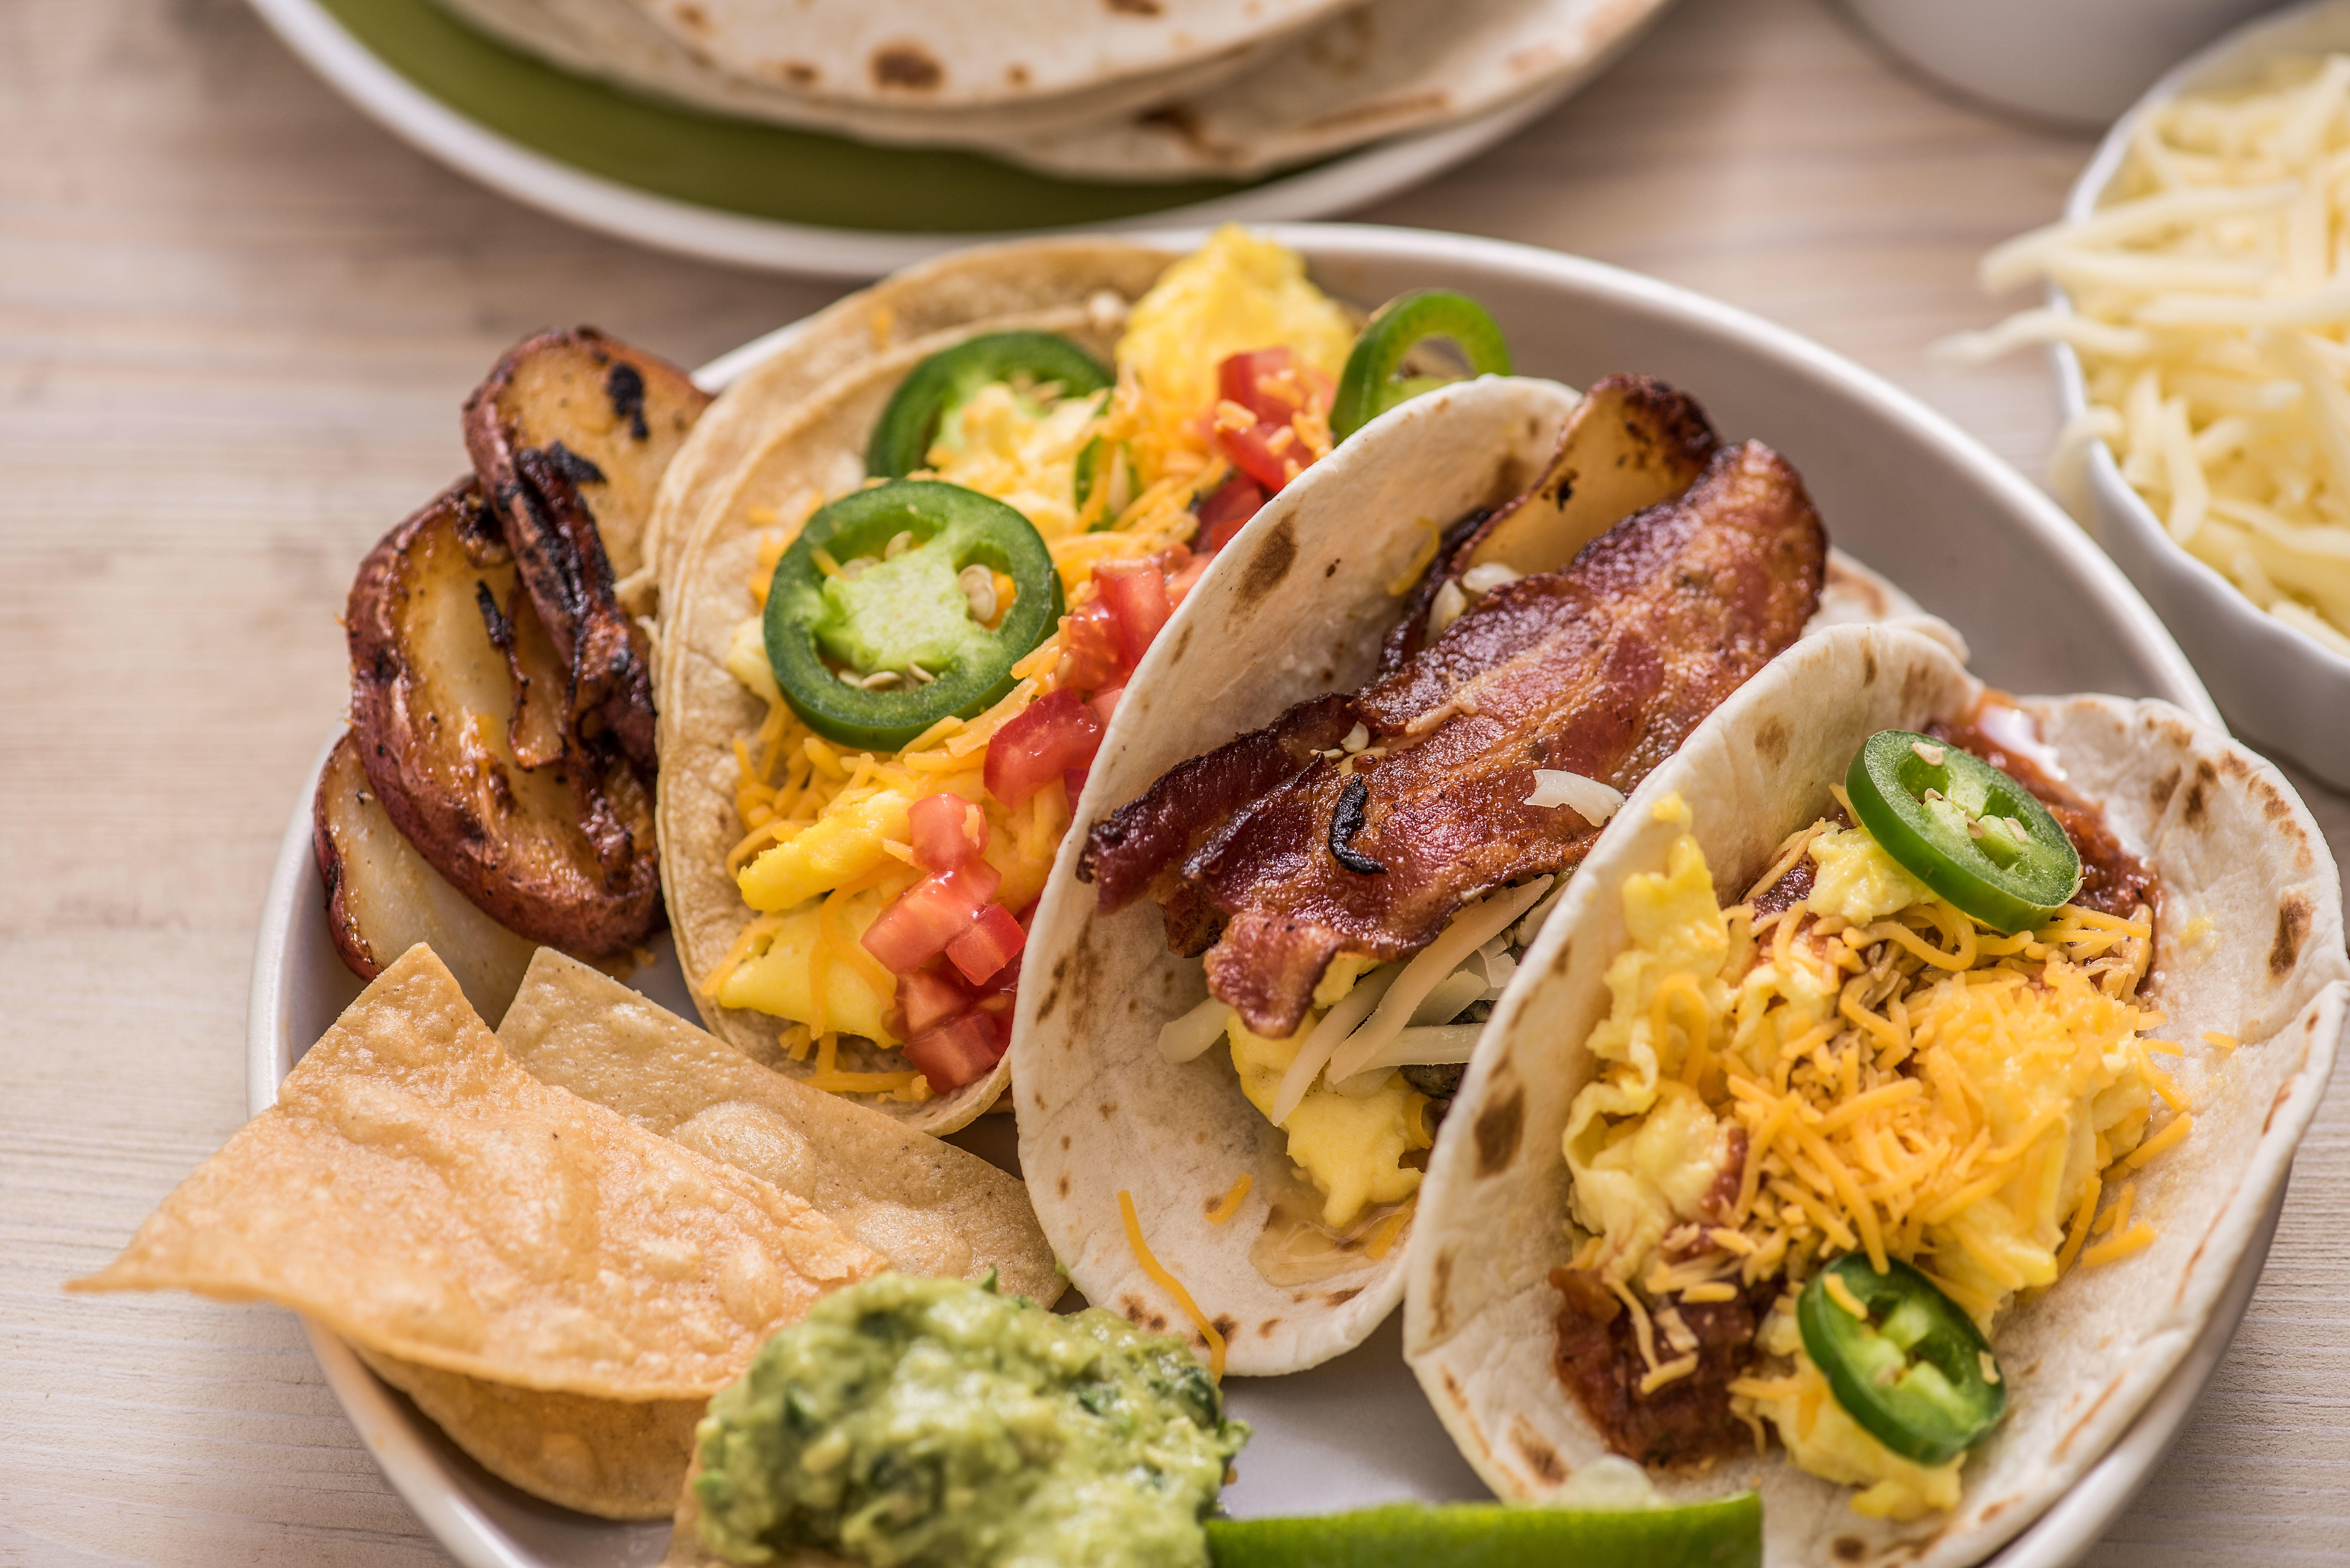 Breakfast tacos with bacon, eggs, jalapenos, jack and cheddar cheese Burrito Beach Chicago (773)462-0190